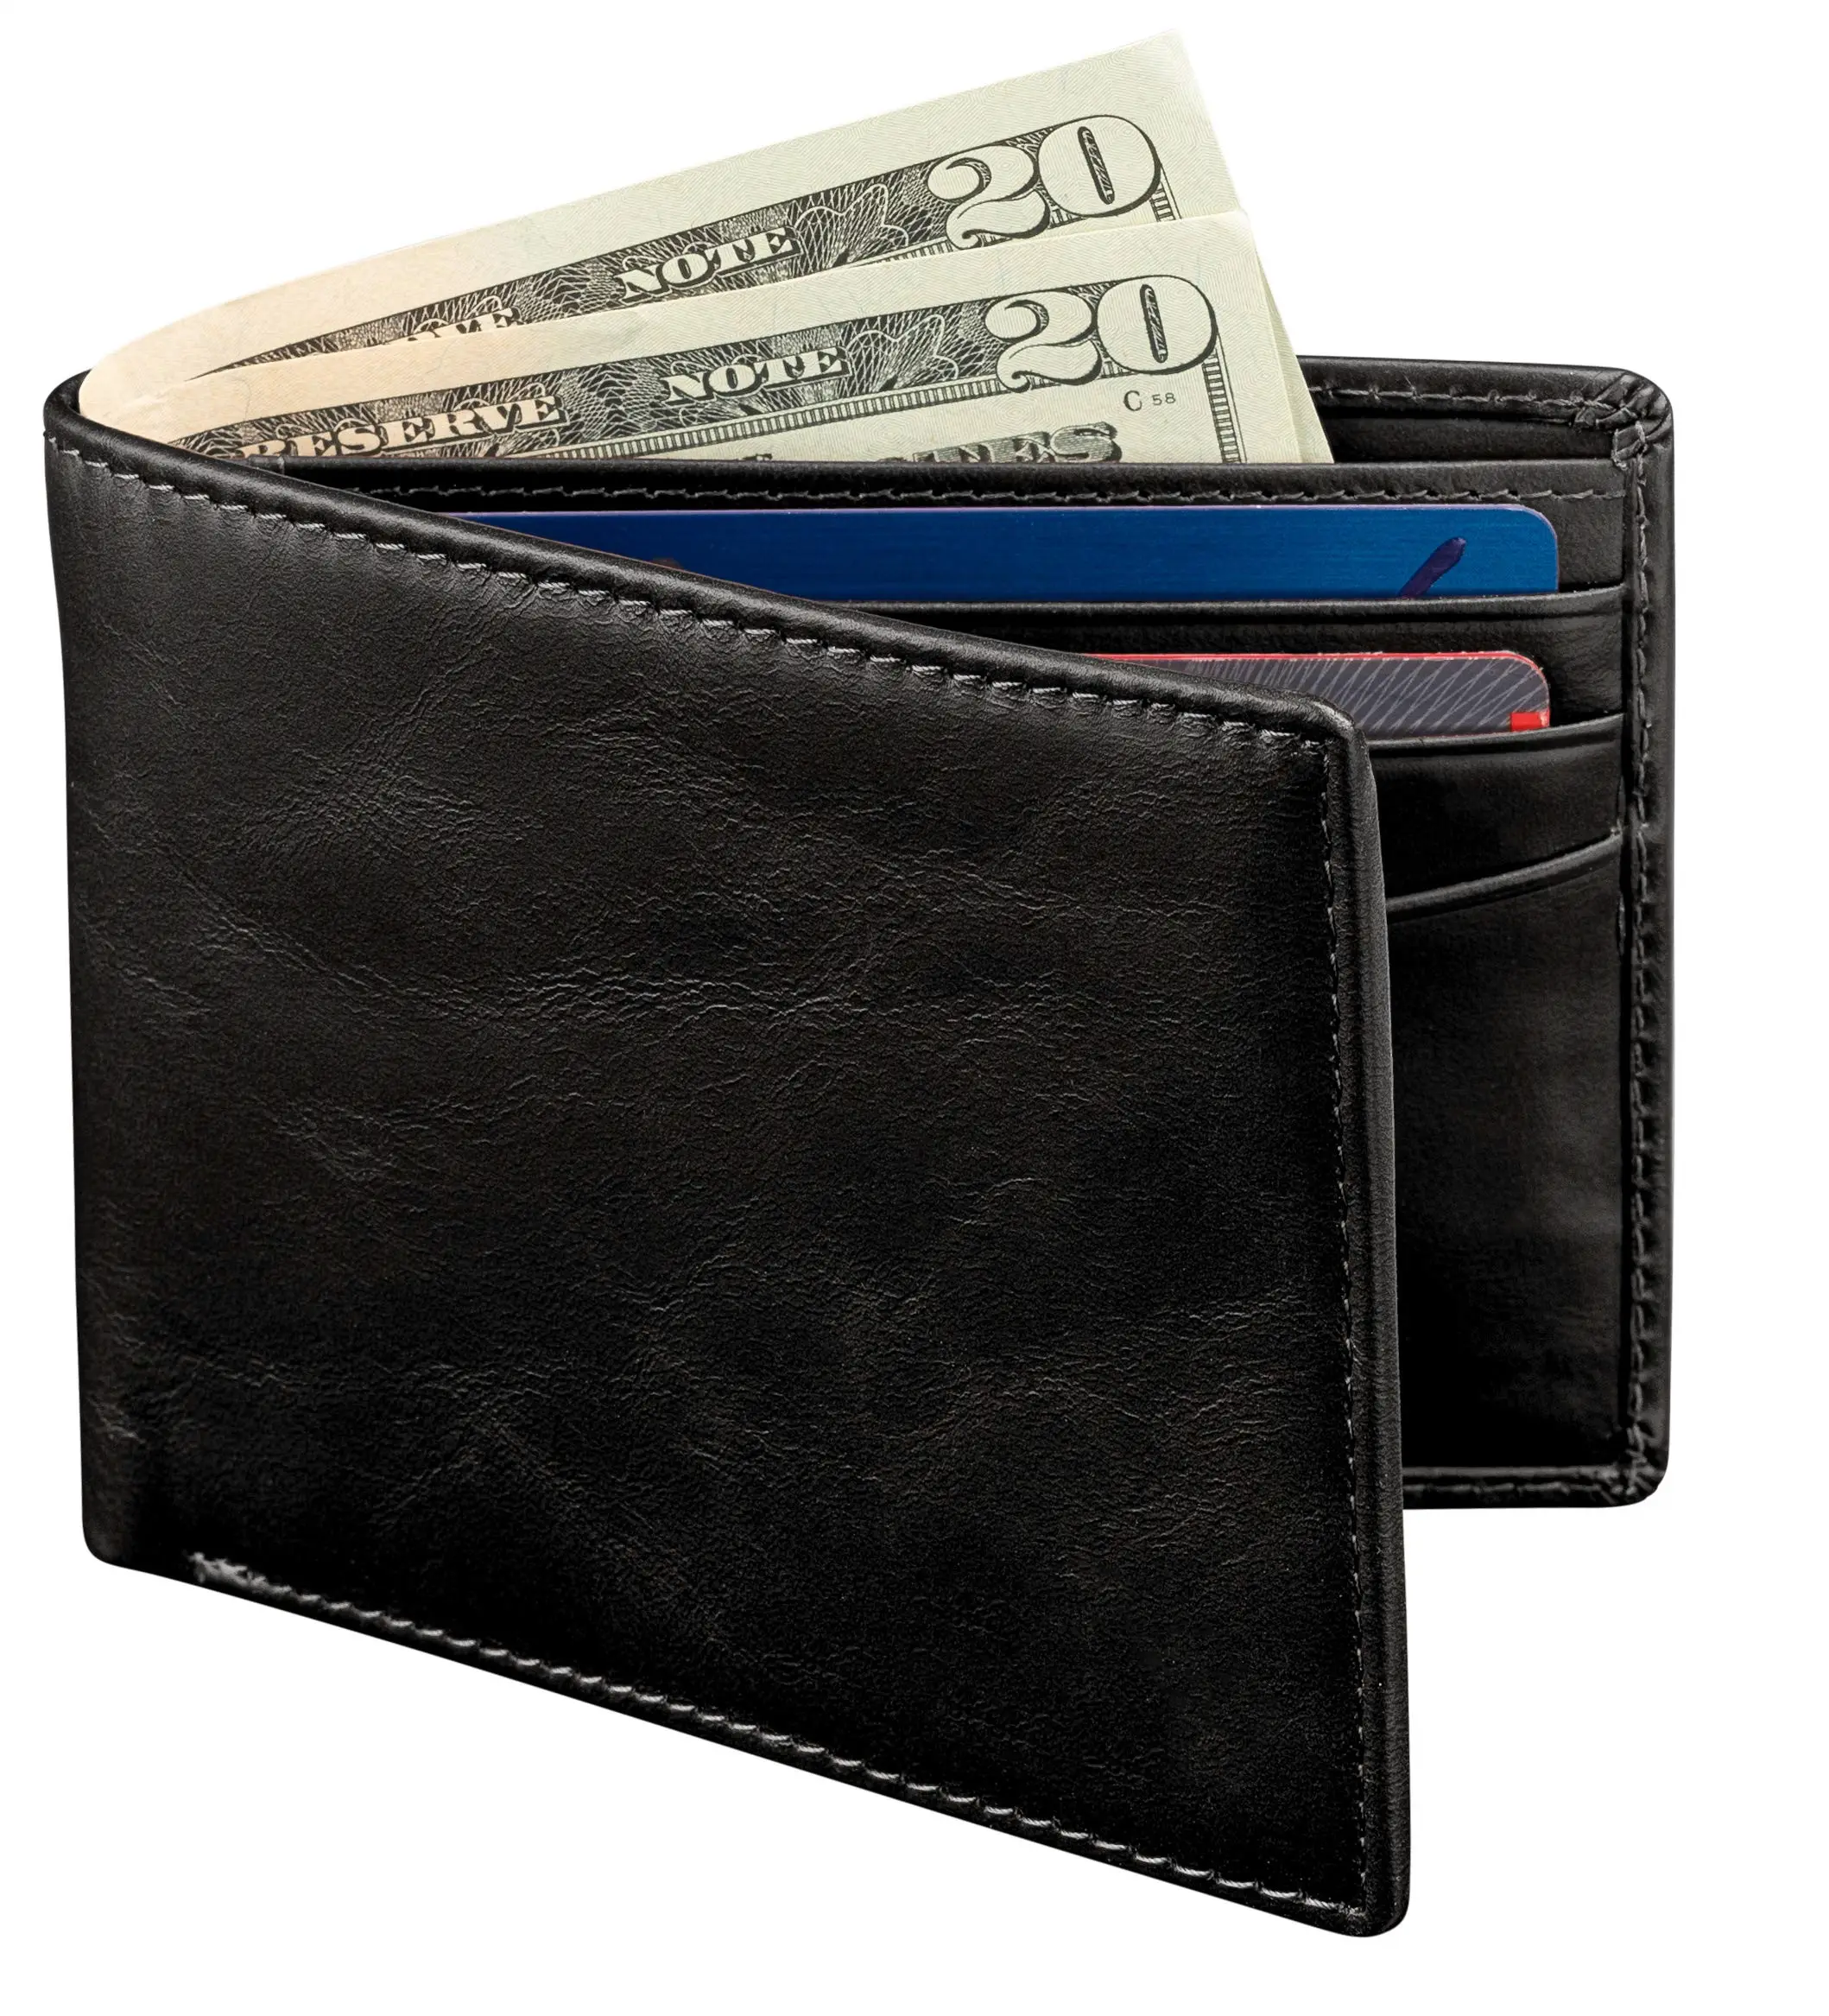 Mens Short Wallet Leather Male Casual Purse Id Cards Holder Clutch Coin Purse Money Pocket Bags